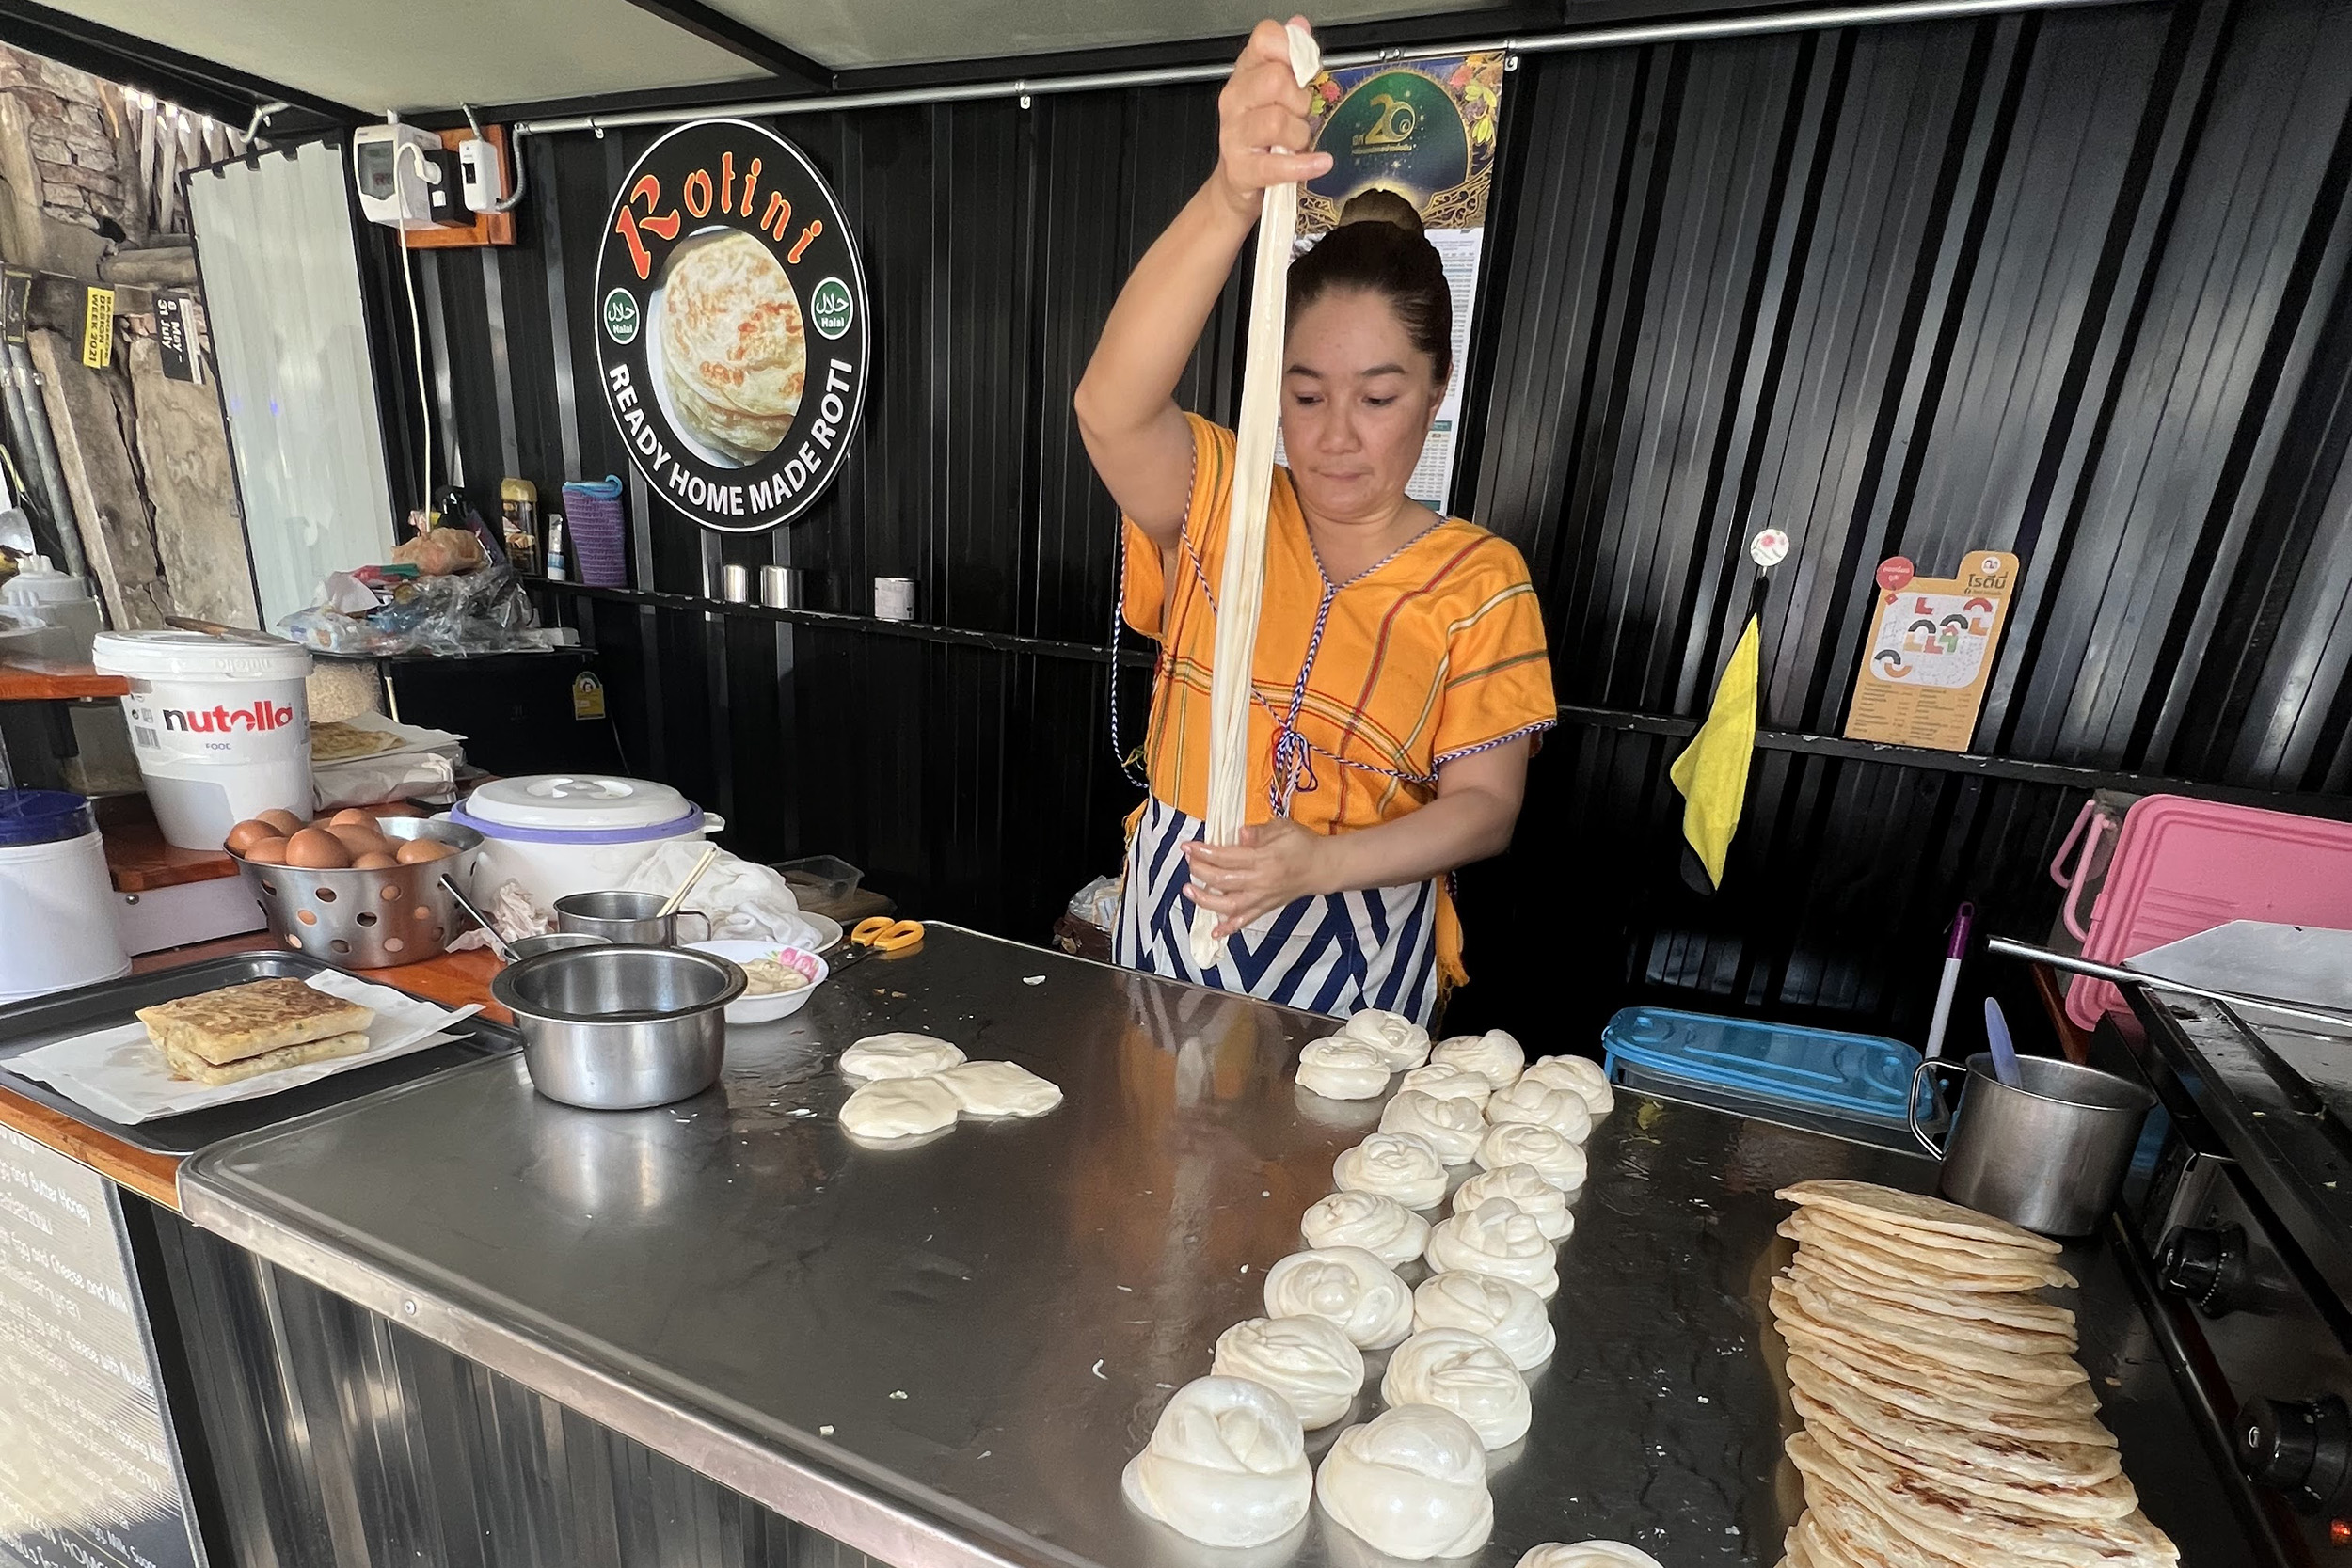 This is the lady who is making our Roti, our afternoon snack. It was kind of like a sweet bread thick tortilla with sweetened condensed milk wrapped up in it. They were very good.